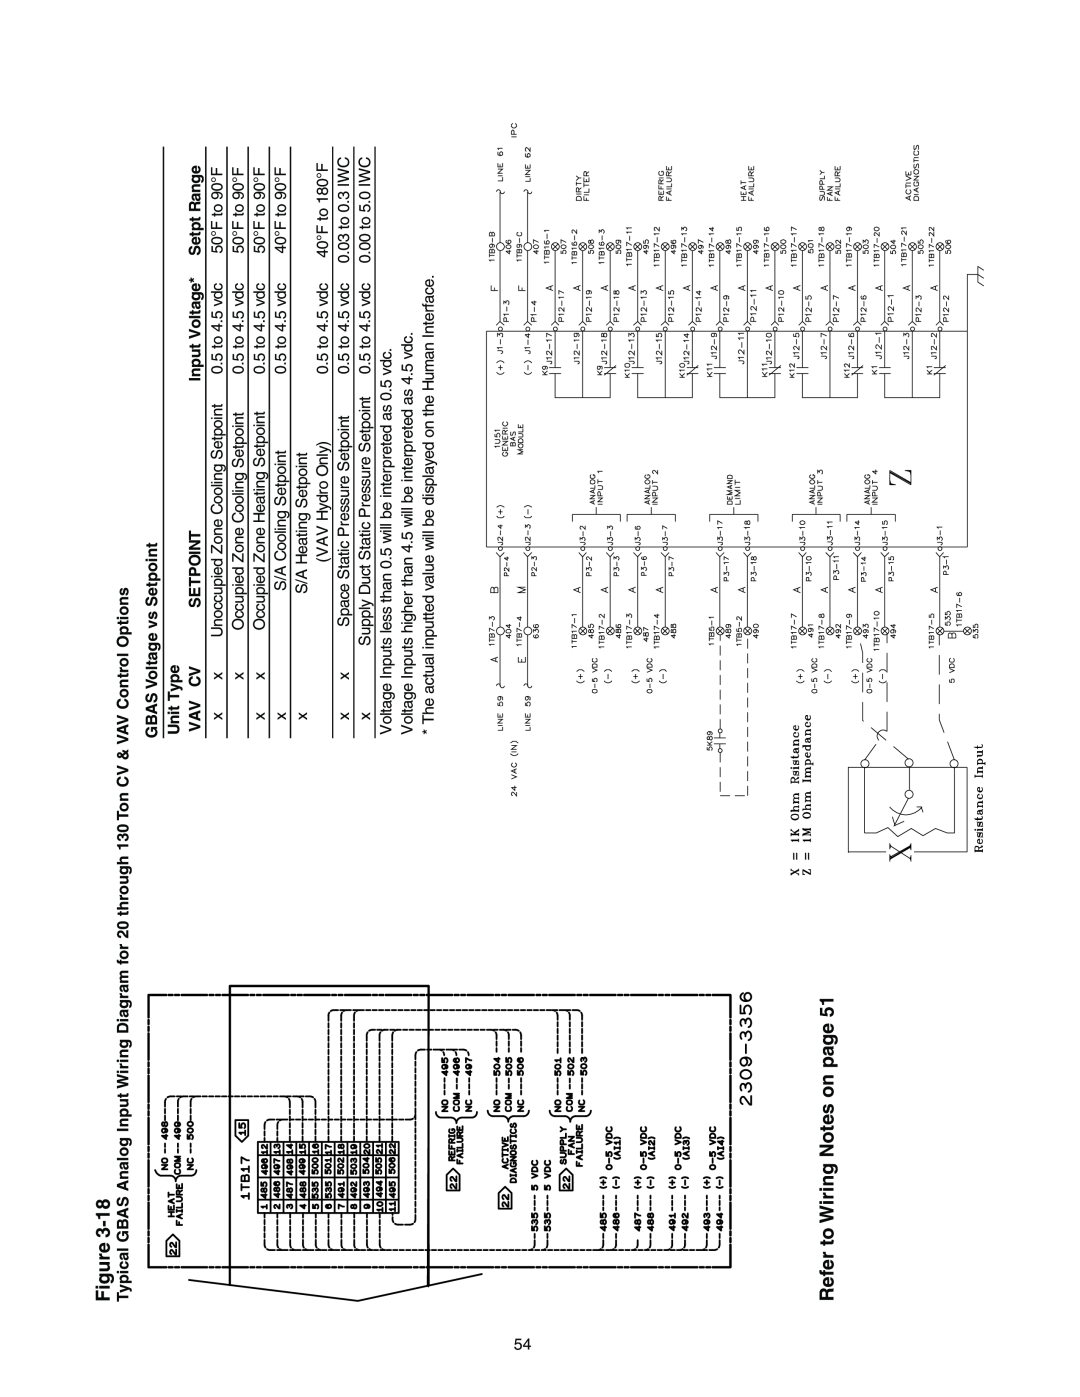 Trane RT-SVX10C-EN specifications Figure, Refer to Wiring Notes on page, GBAS Voltage vs Setpoint, Unit Type, Input Voltage 